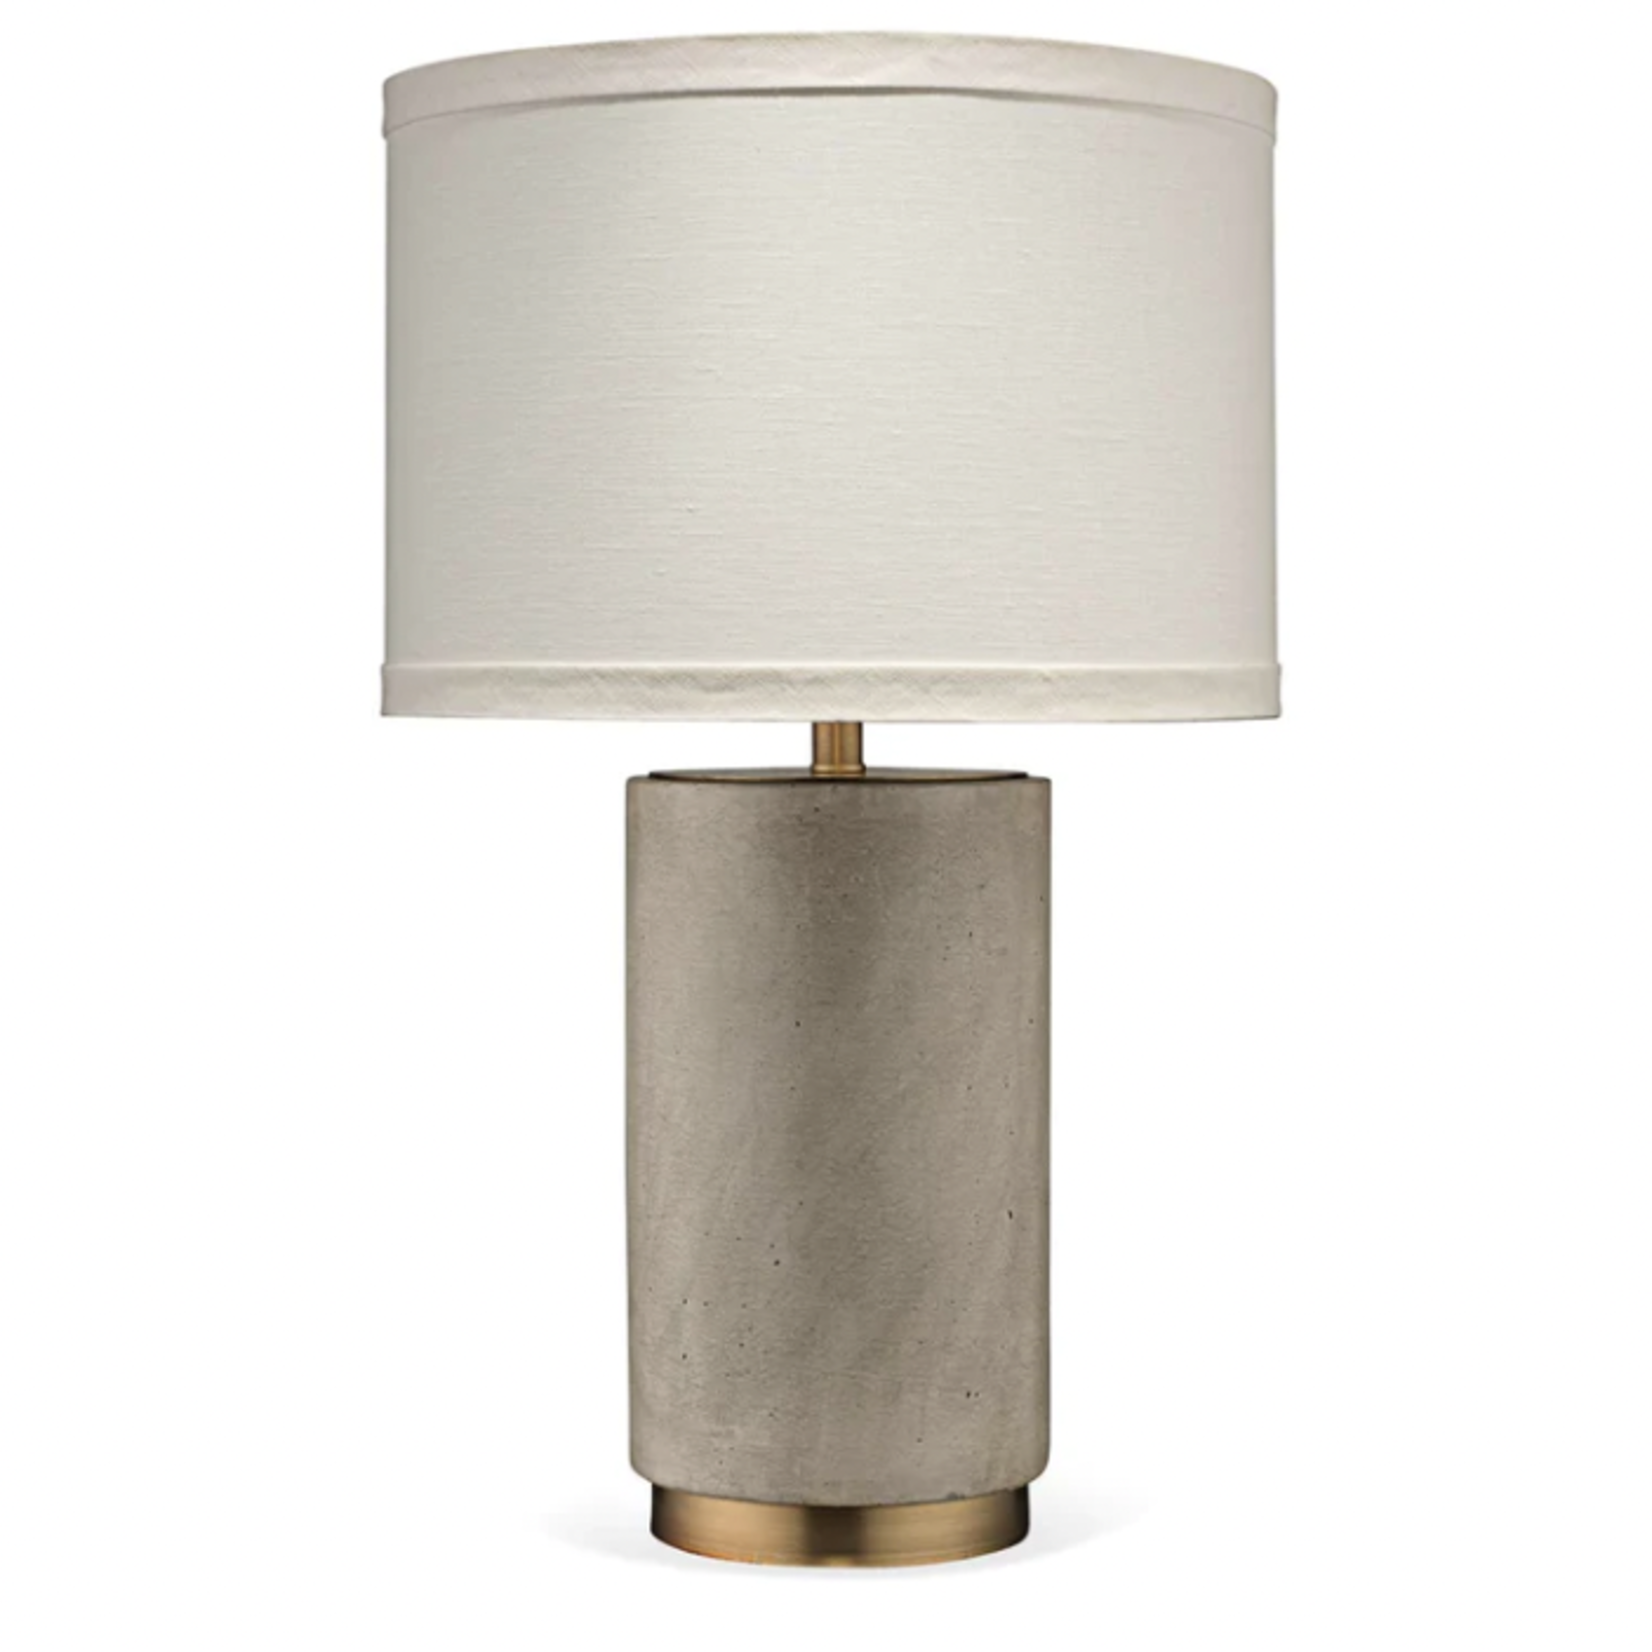 G3 Mortar Table Lamp Cement/Brass